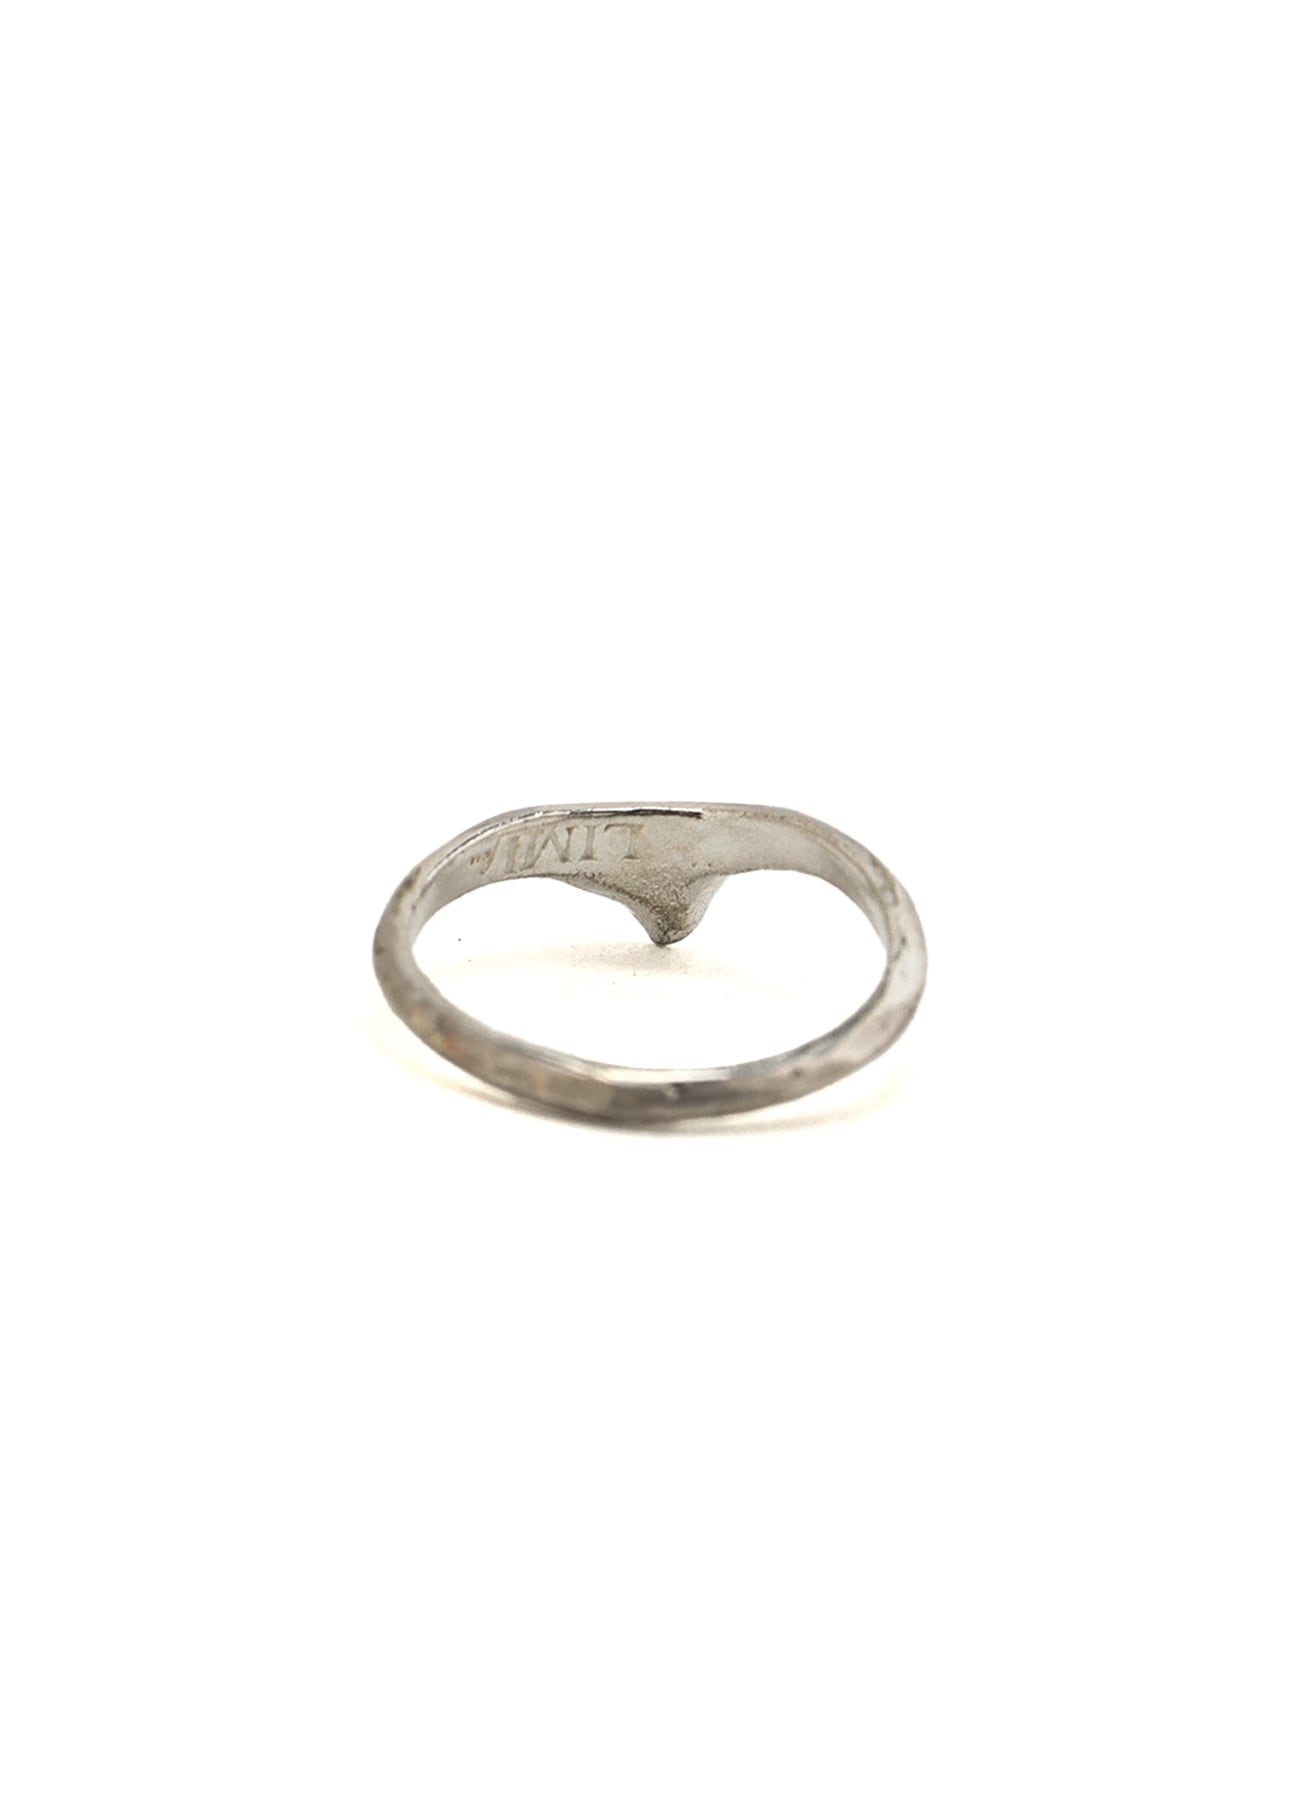 SILVER925 SHARK TOOTH RING